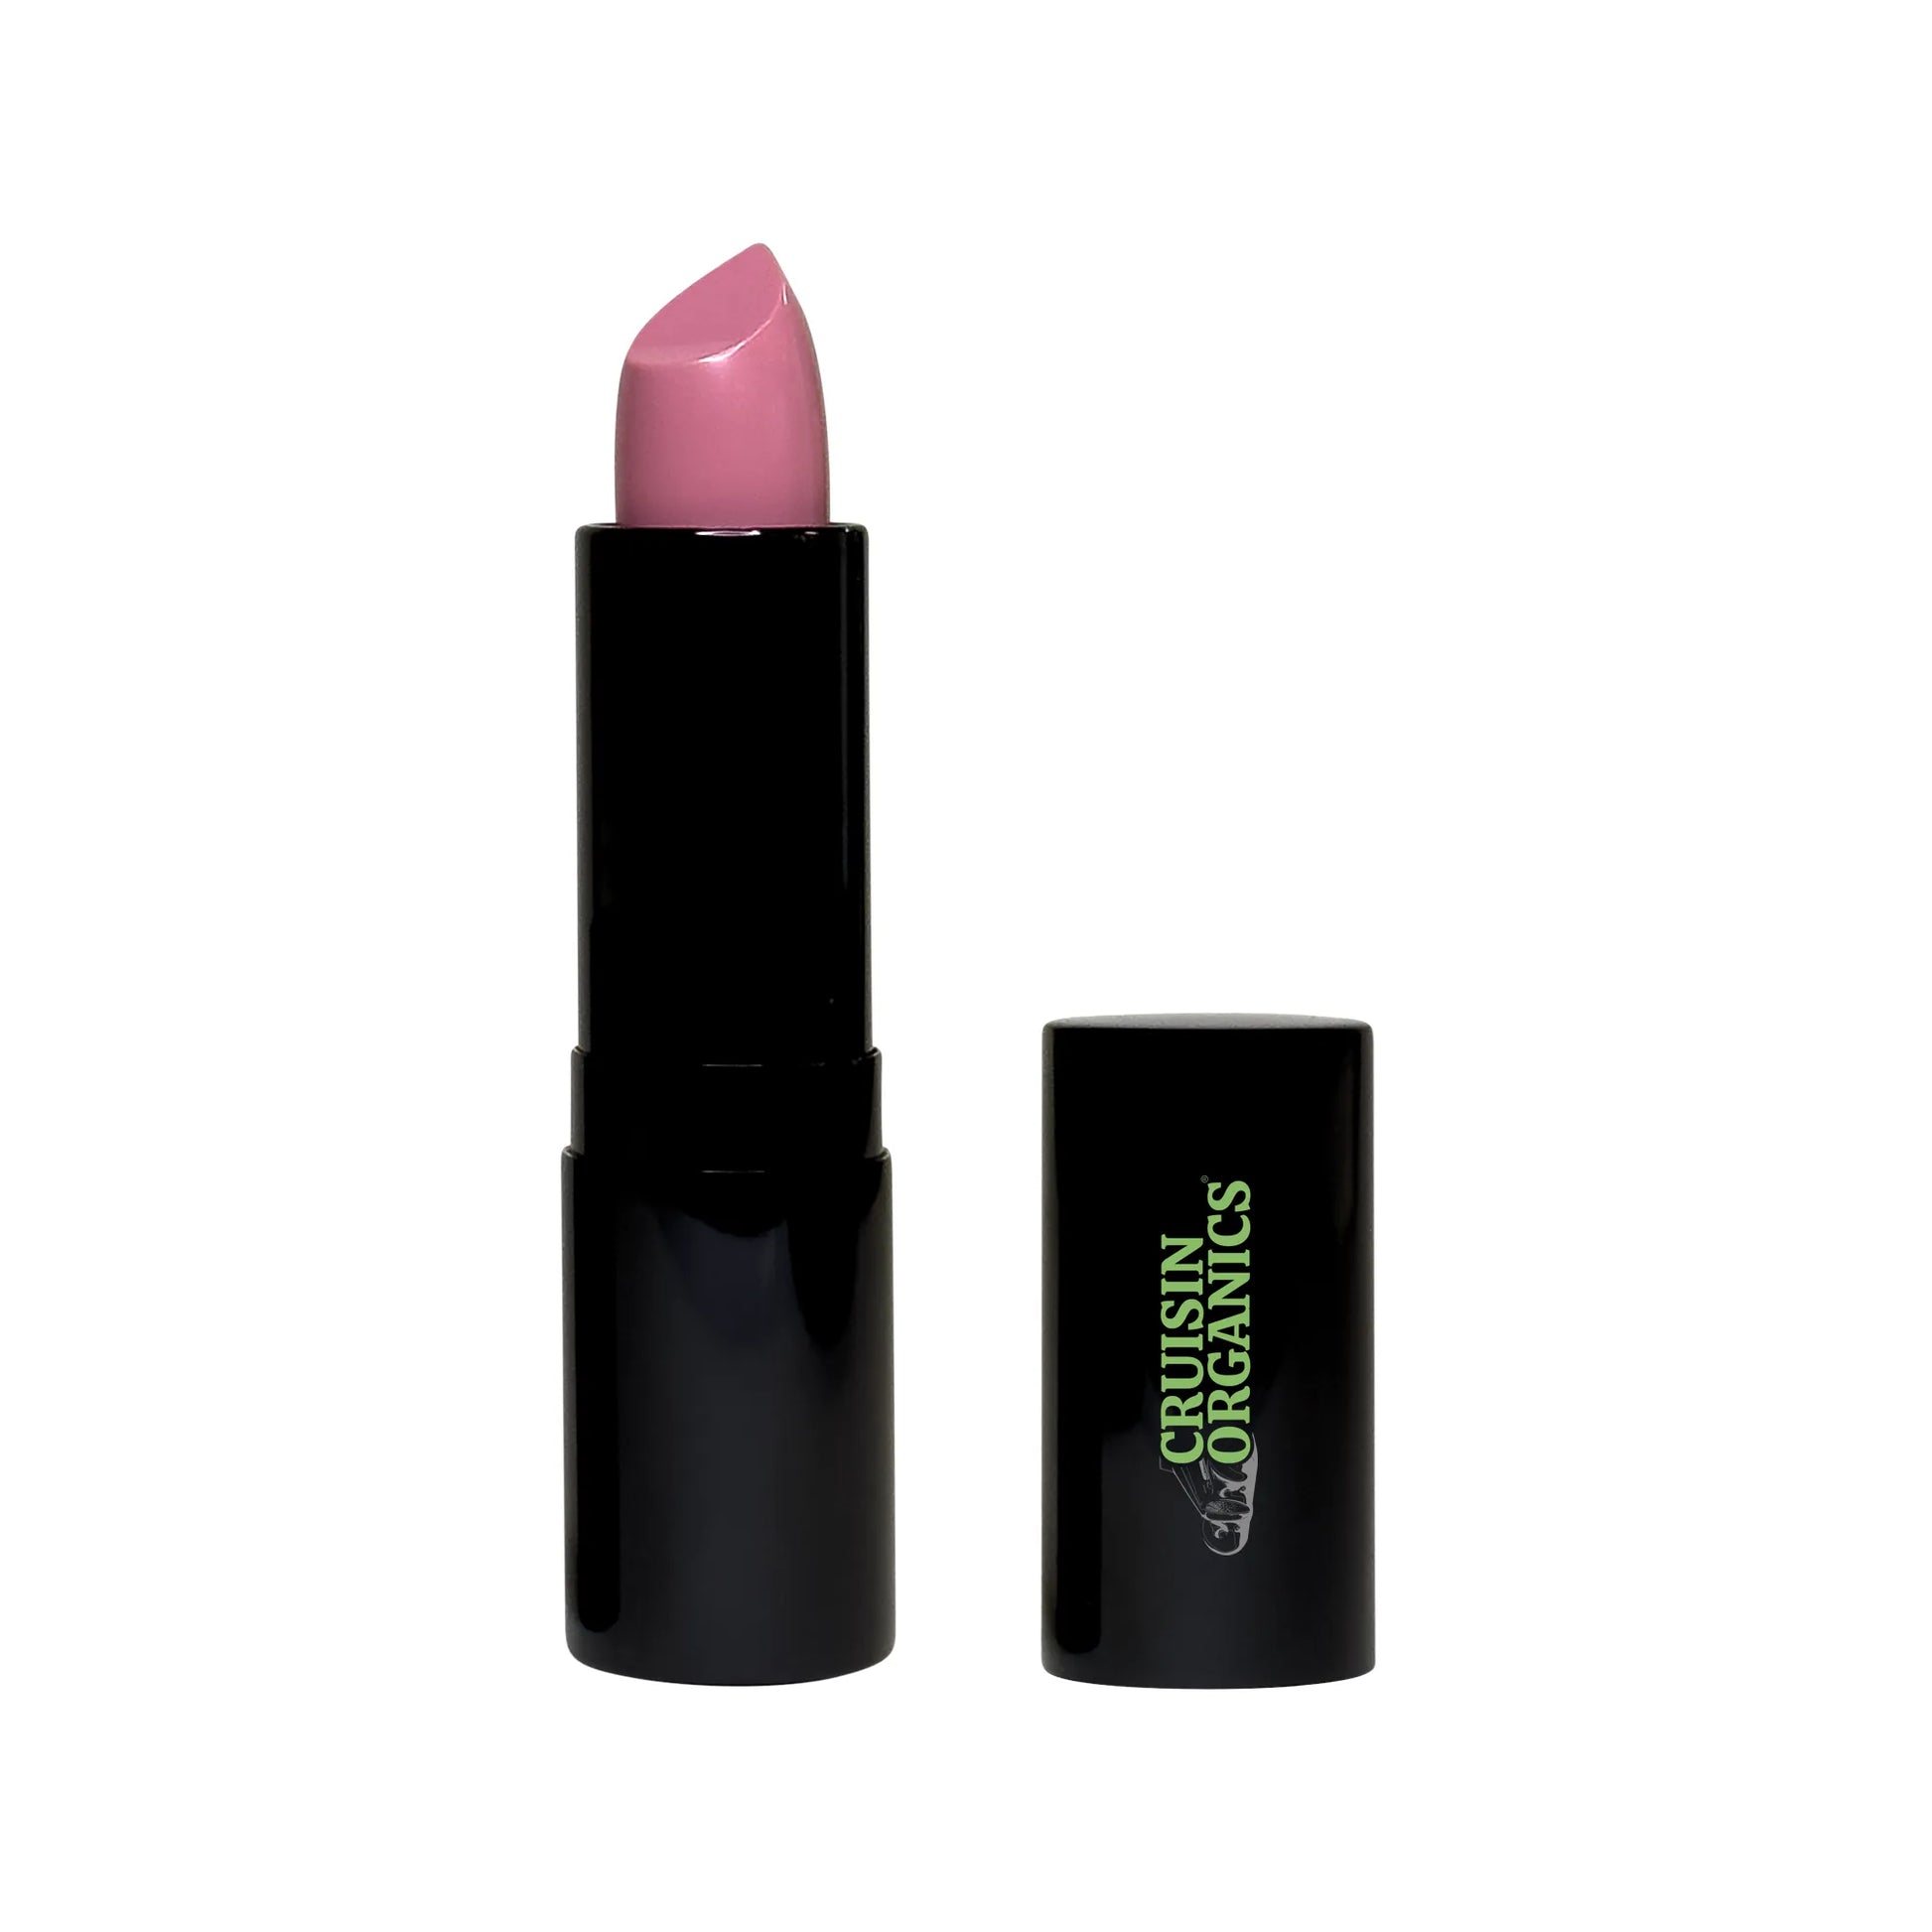 Precious Pink Lipstick from Cruisin Organics is a creamy, luxurious blend of butters and oils.